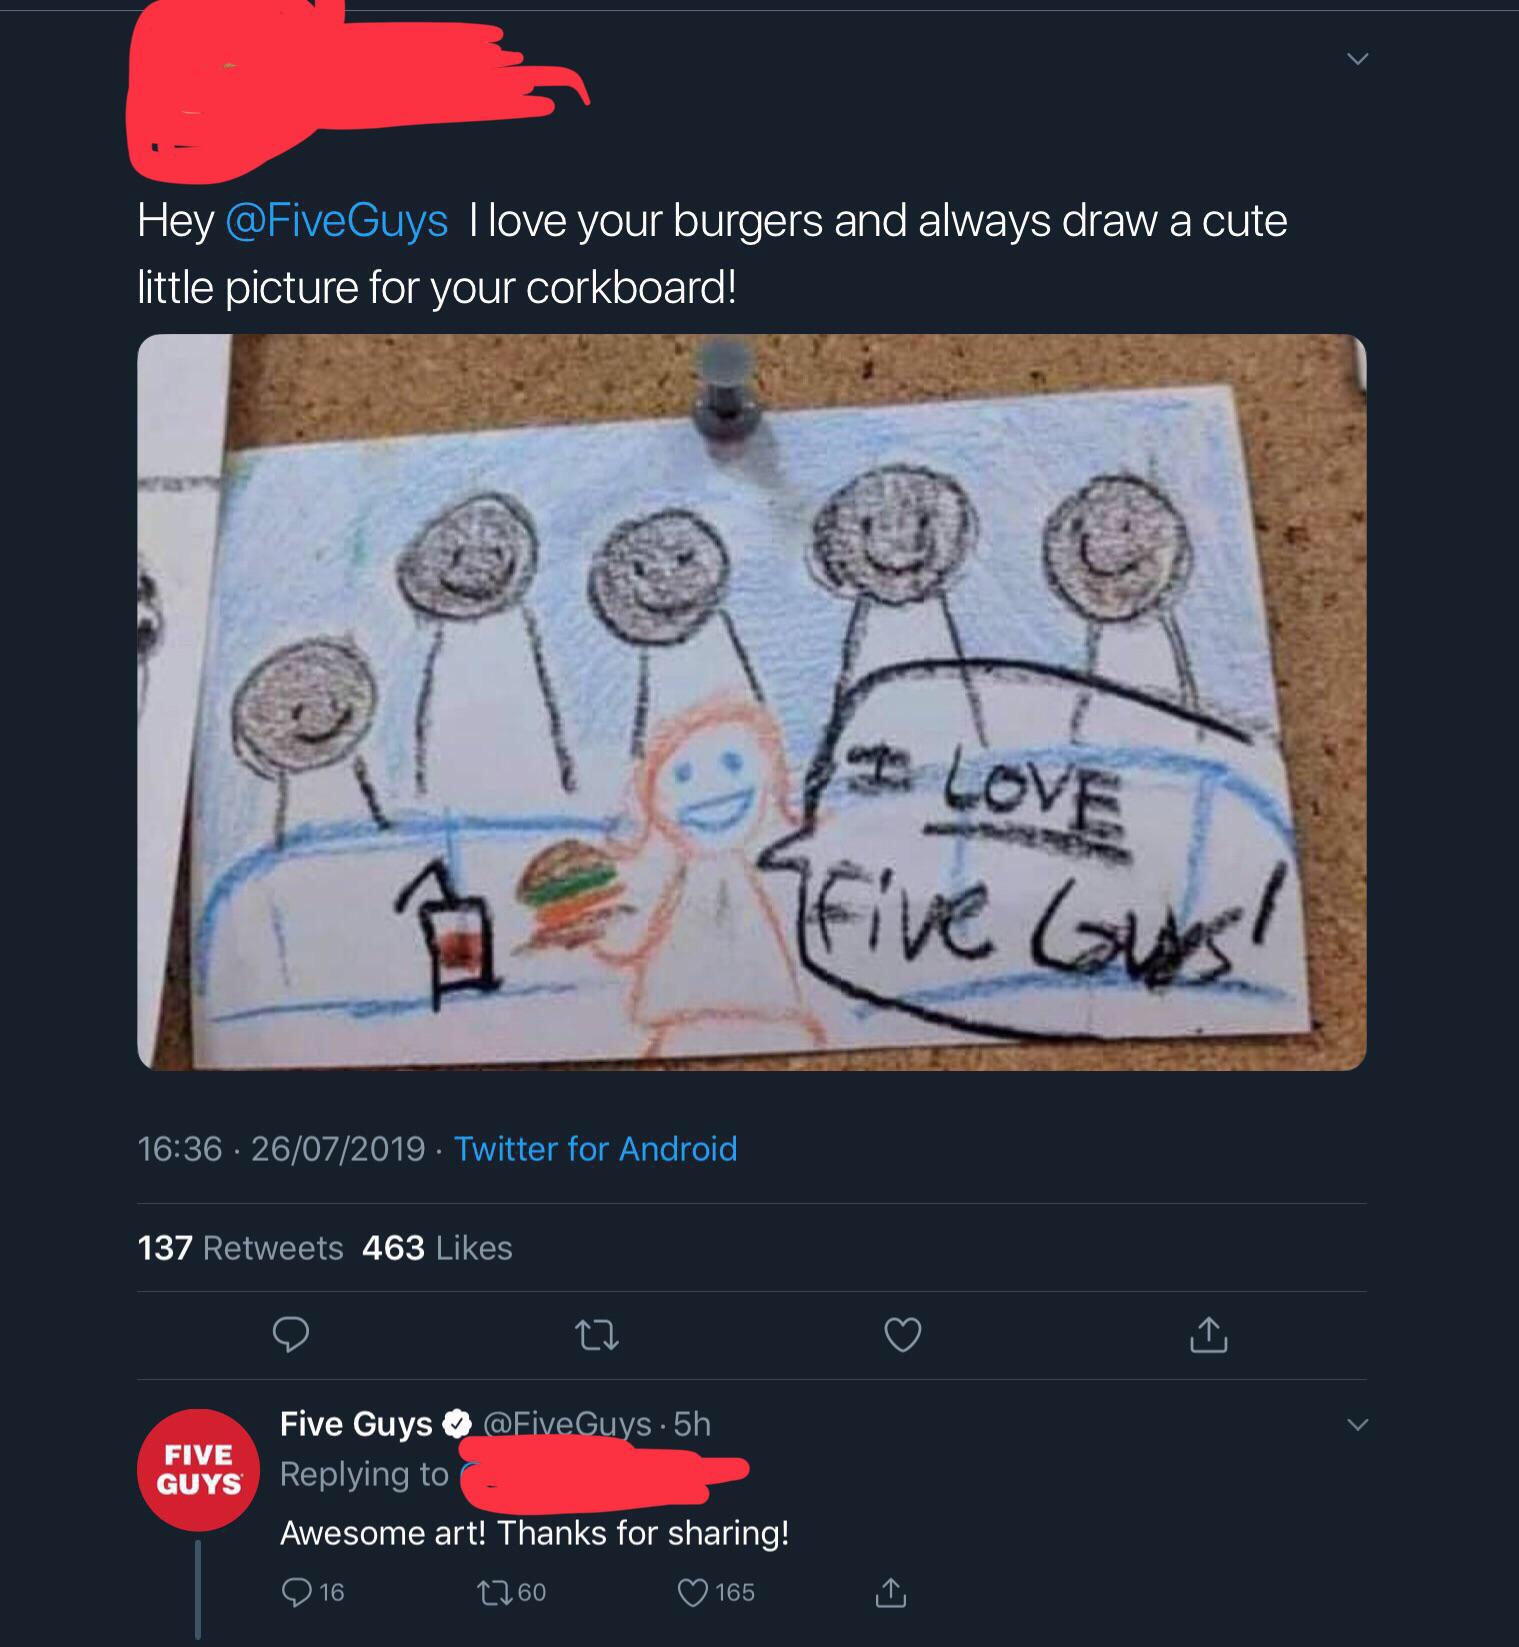 Meme - Hey Guys I love your burgers and always draw a cute little picture for your corkboard! Five Guest 26072019. Twitter for Android 137 463 Five Guys Guves Five Guys Guys.5h Awesome art! Thanks for sharing! 0 16 2260 0 165 l